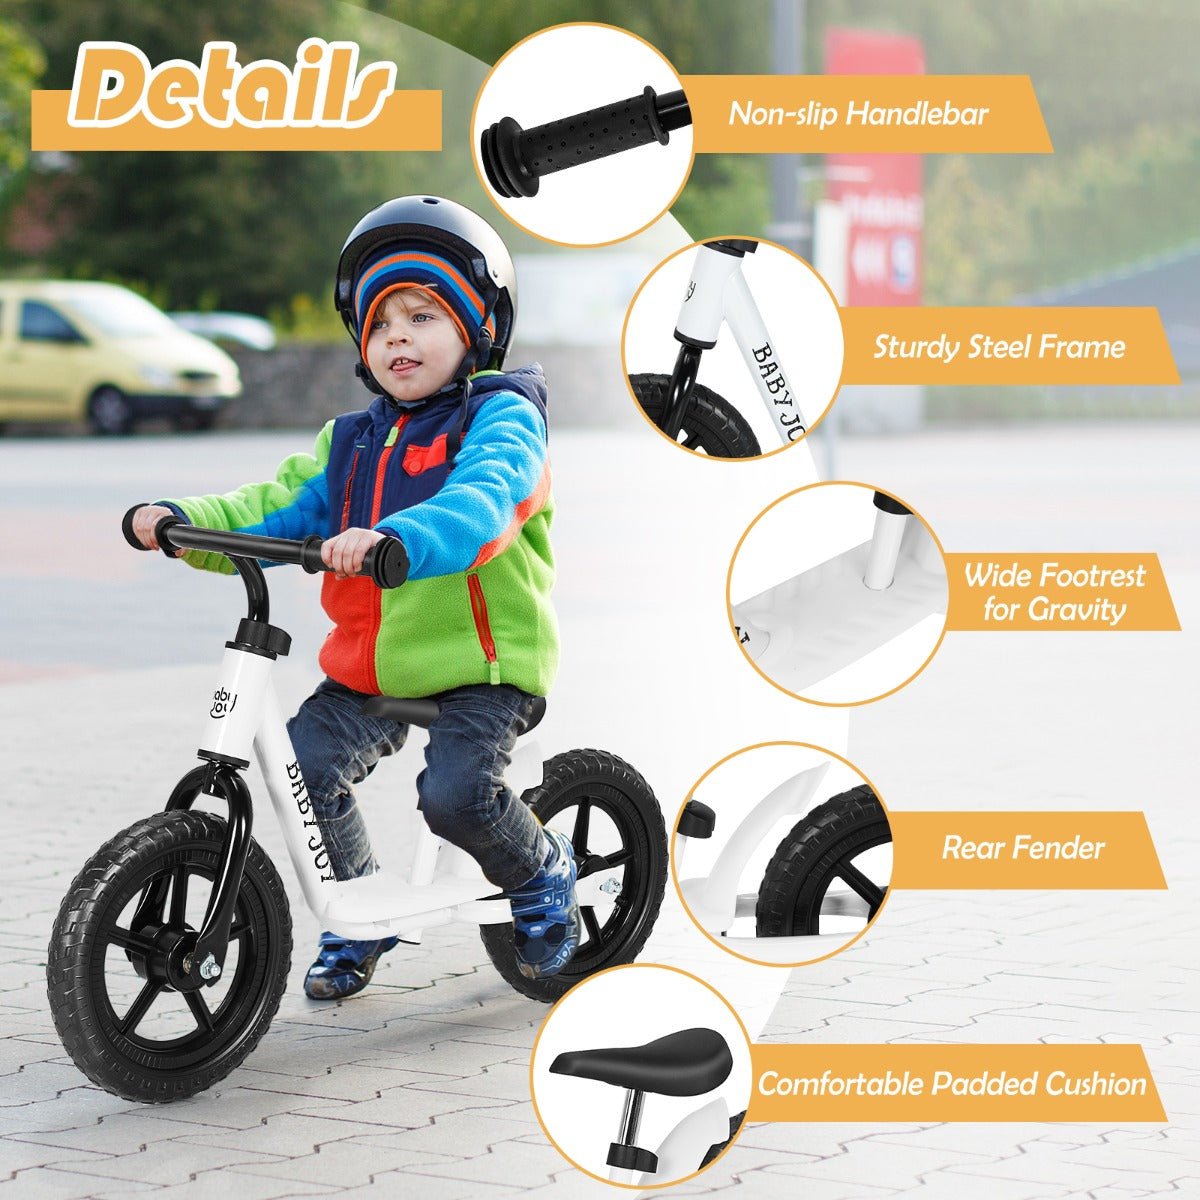 Supporting Little Riders: Adjustable White Balance Bike with Comfortable Fit